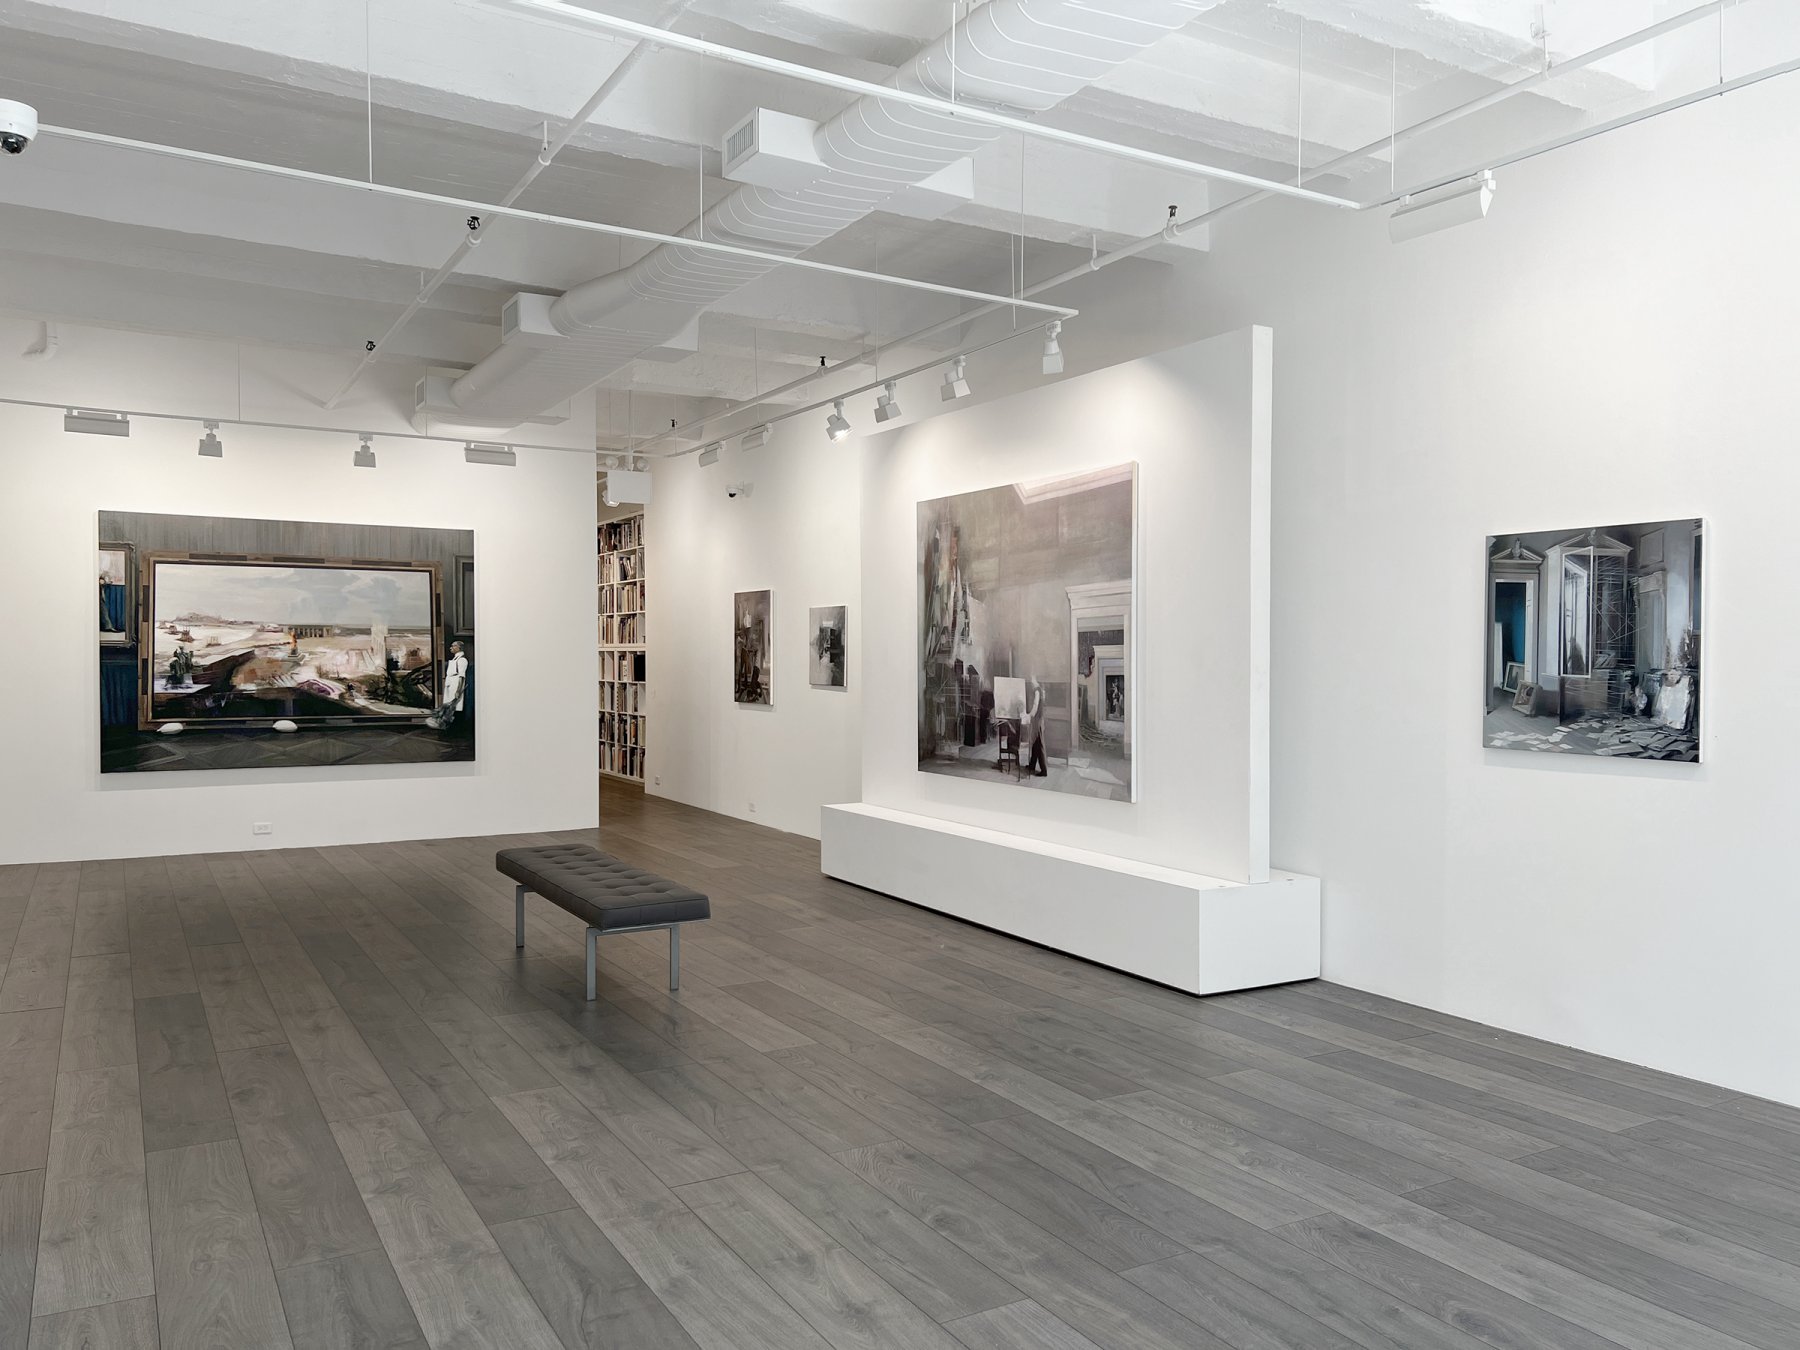 Installation image for Tim Kent: Between the Lines, at Hollis Taggart